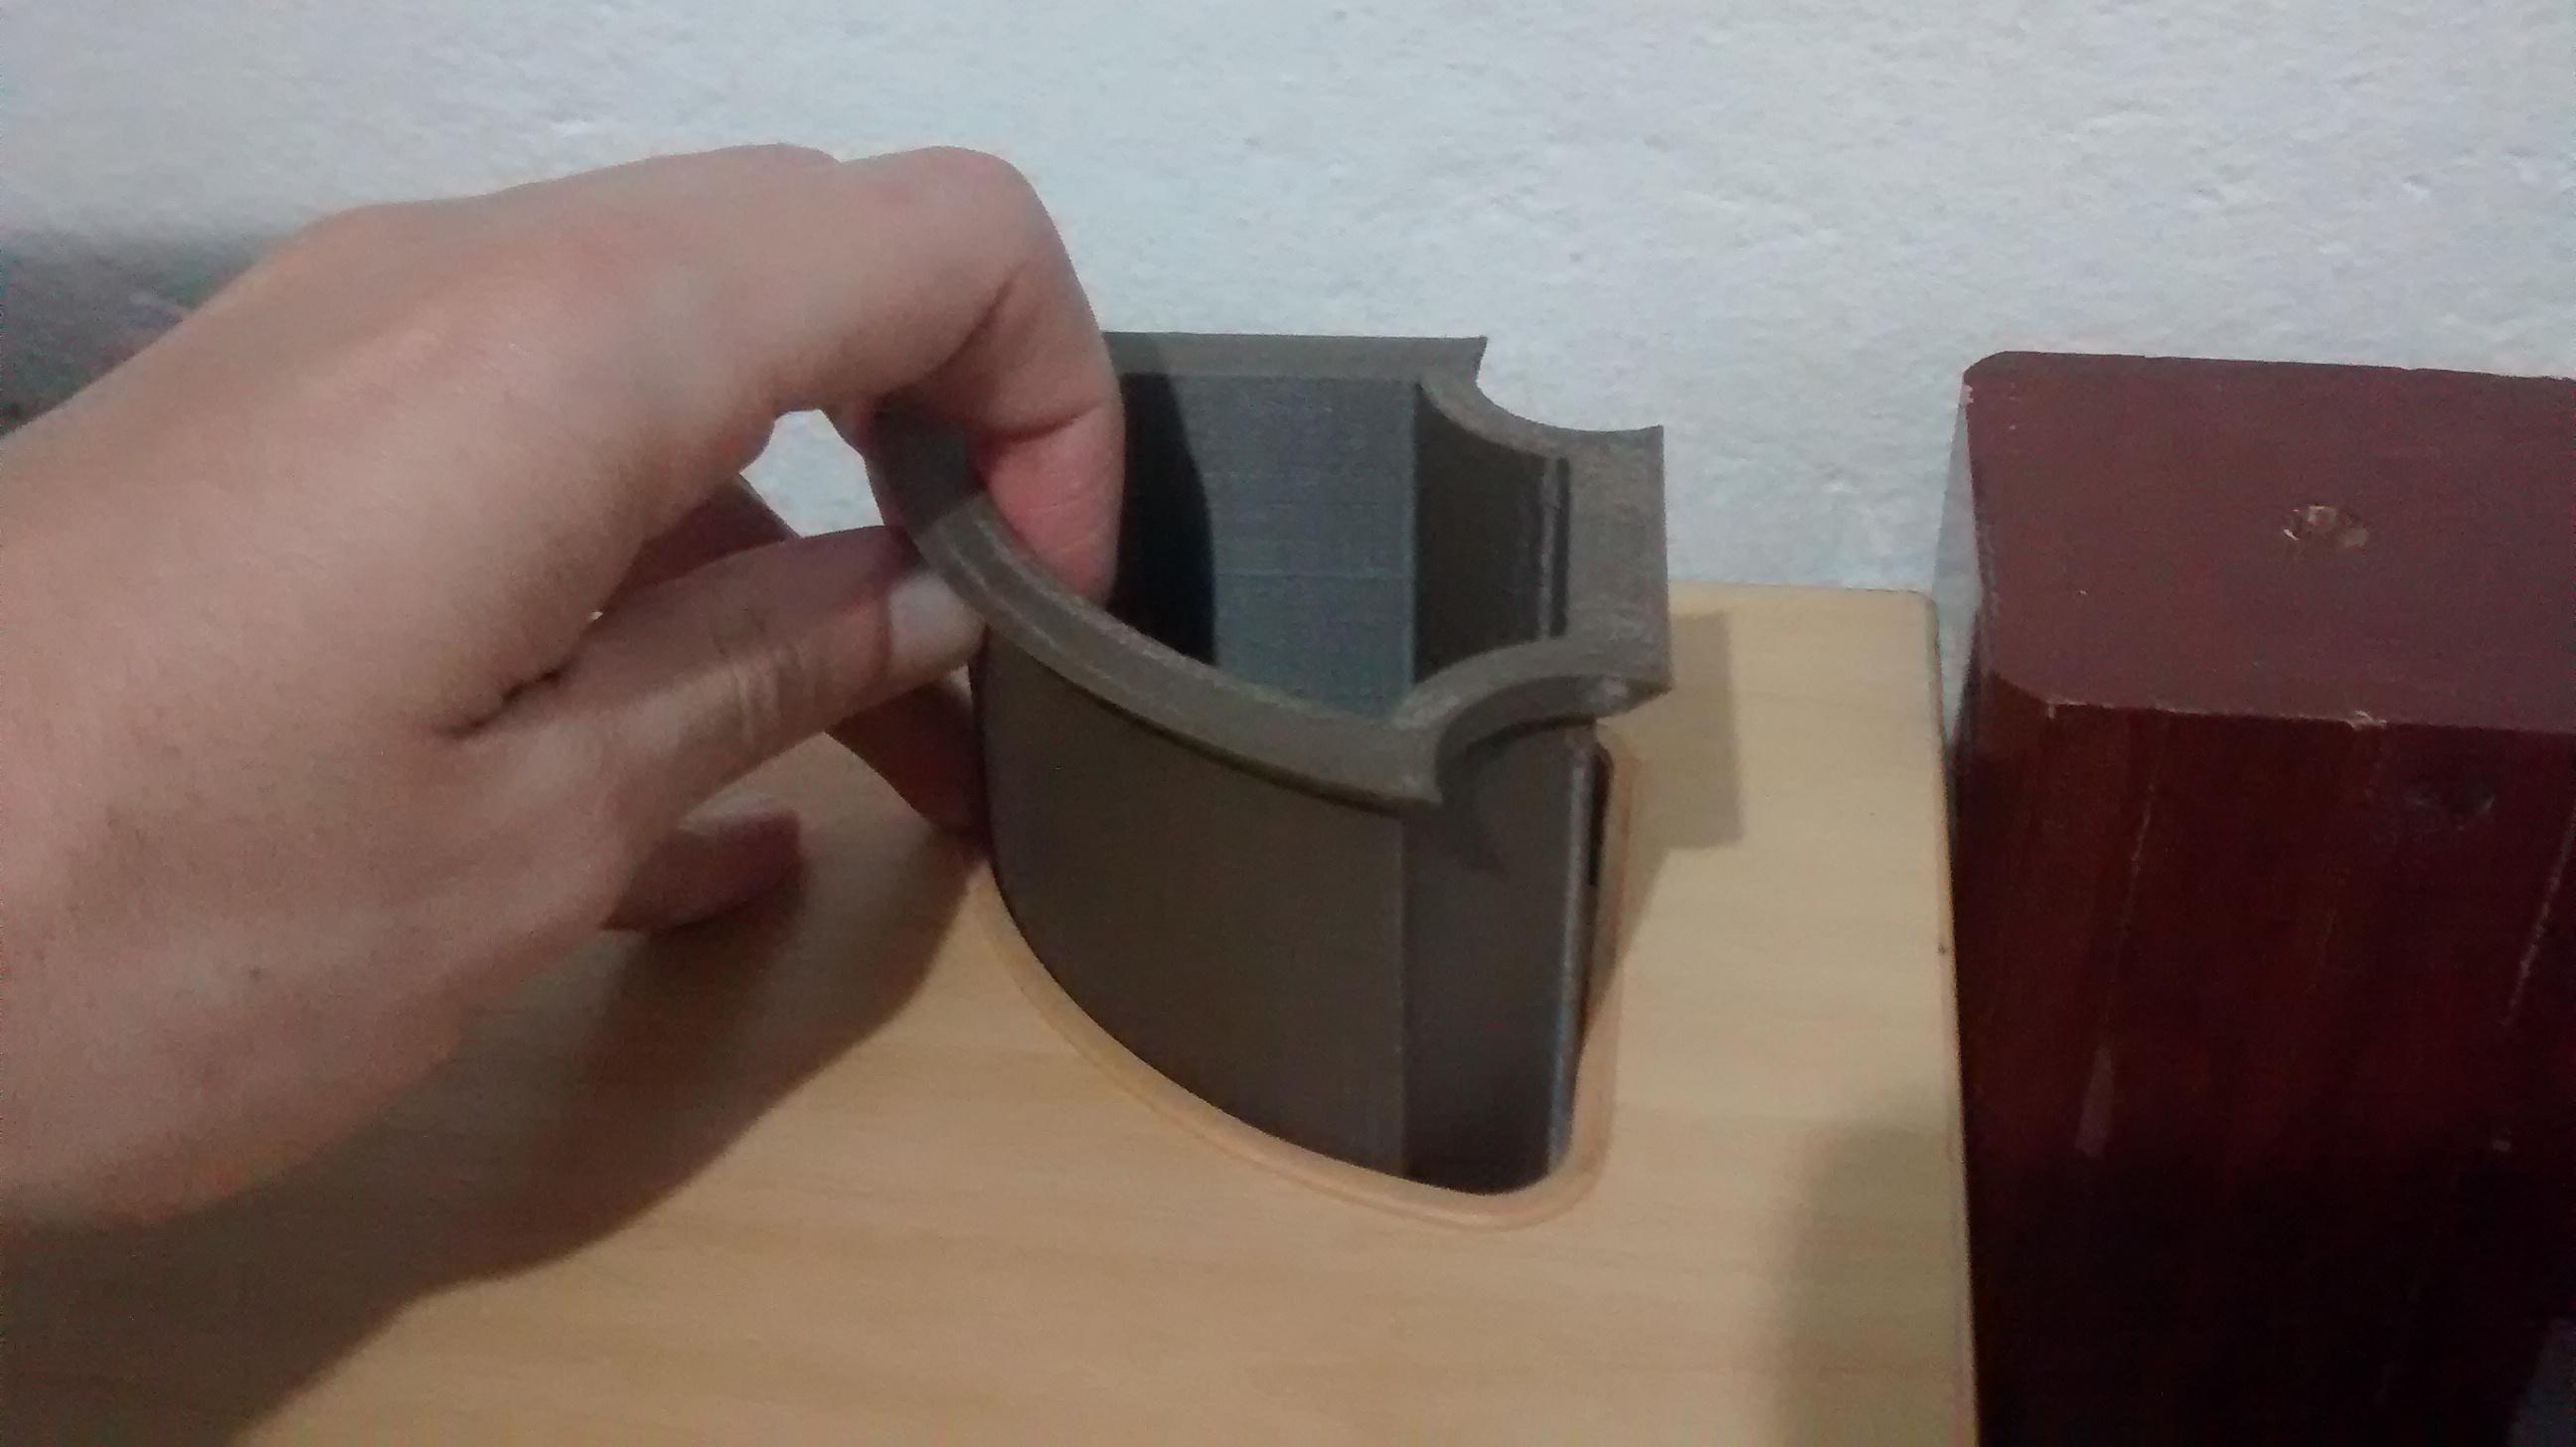 Pen holder 1.STL - Fitting the part into place - 3d model